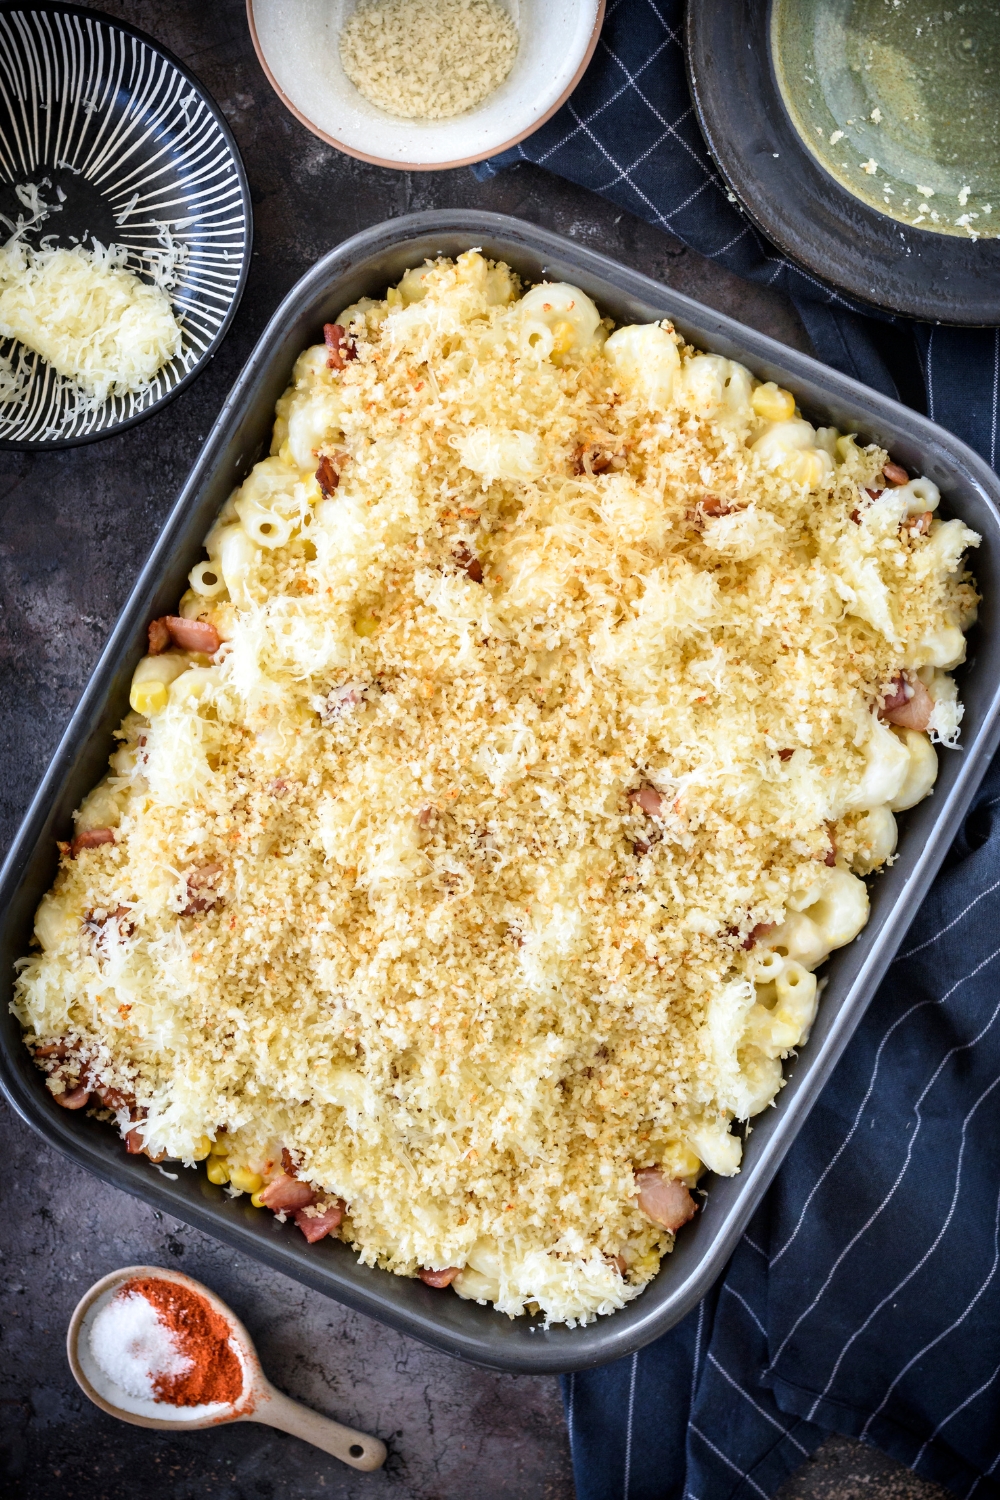 A casserole dish with unbaked macaroni corn casserole topped with panko topping.